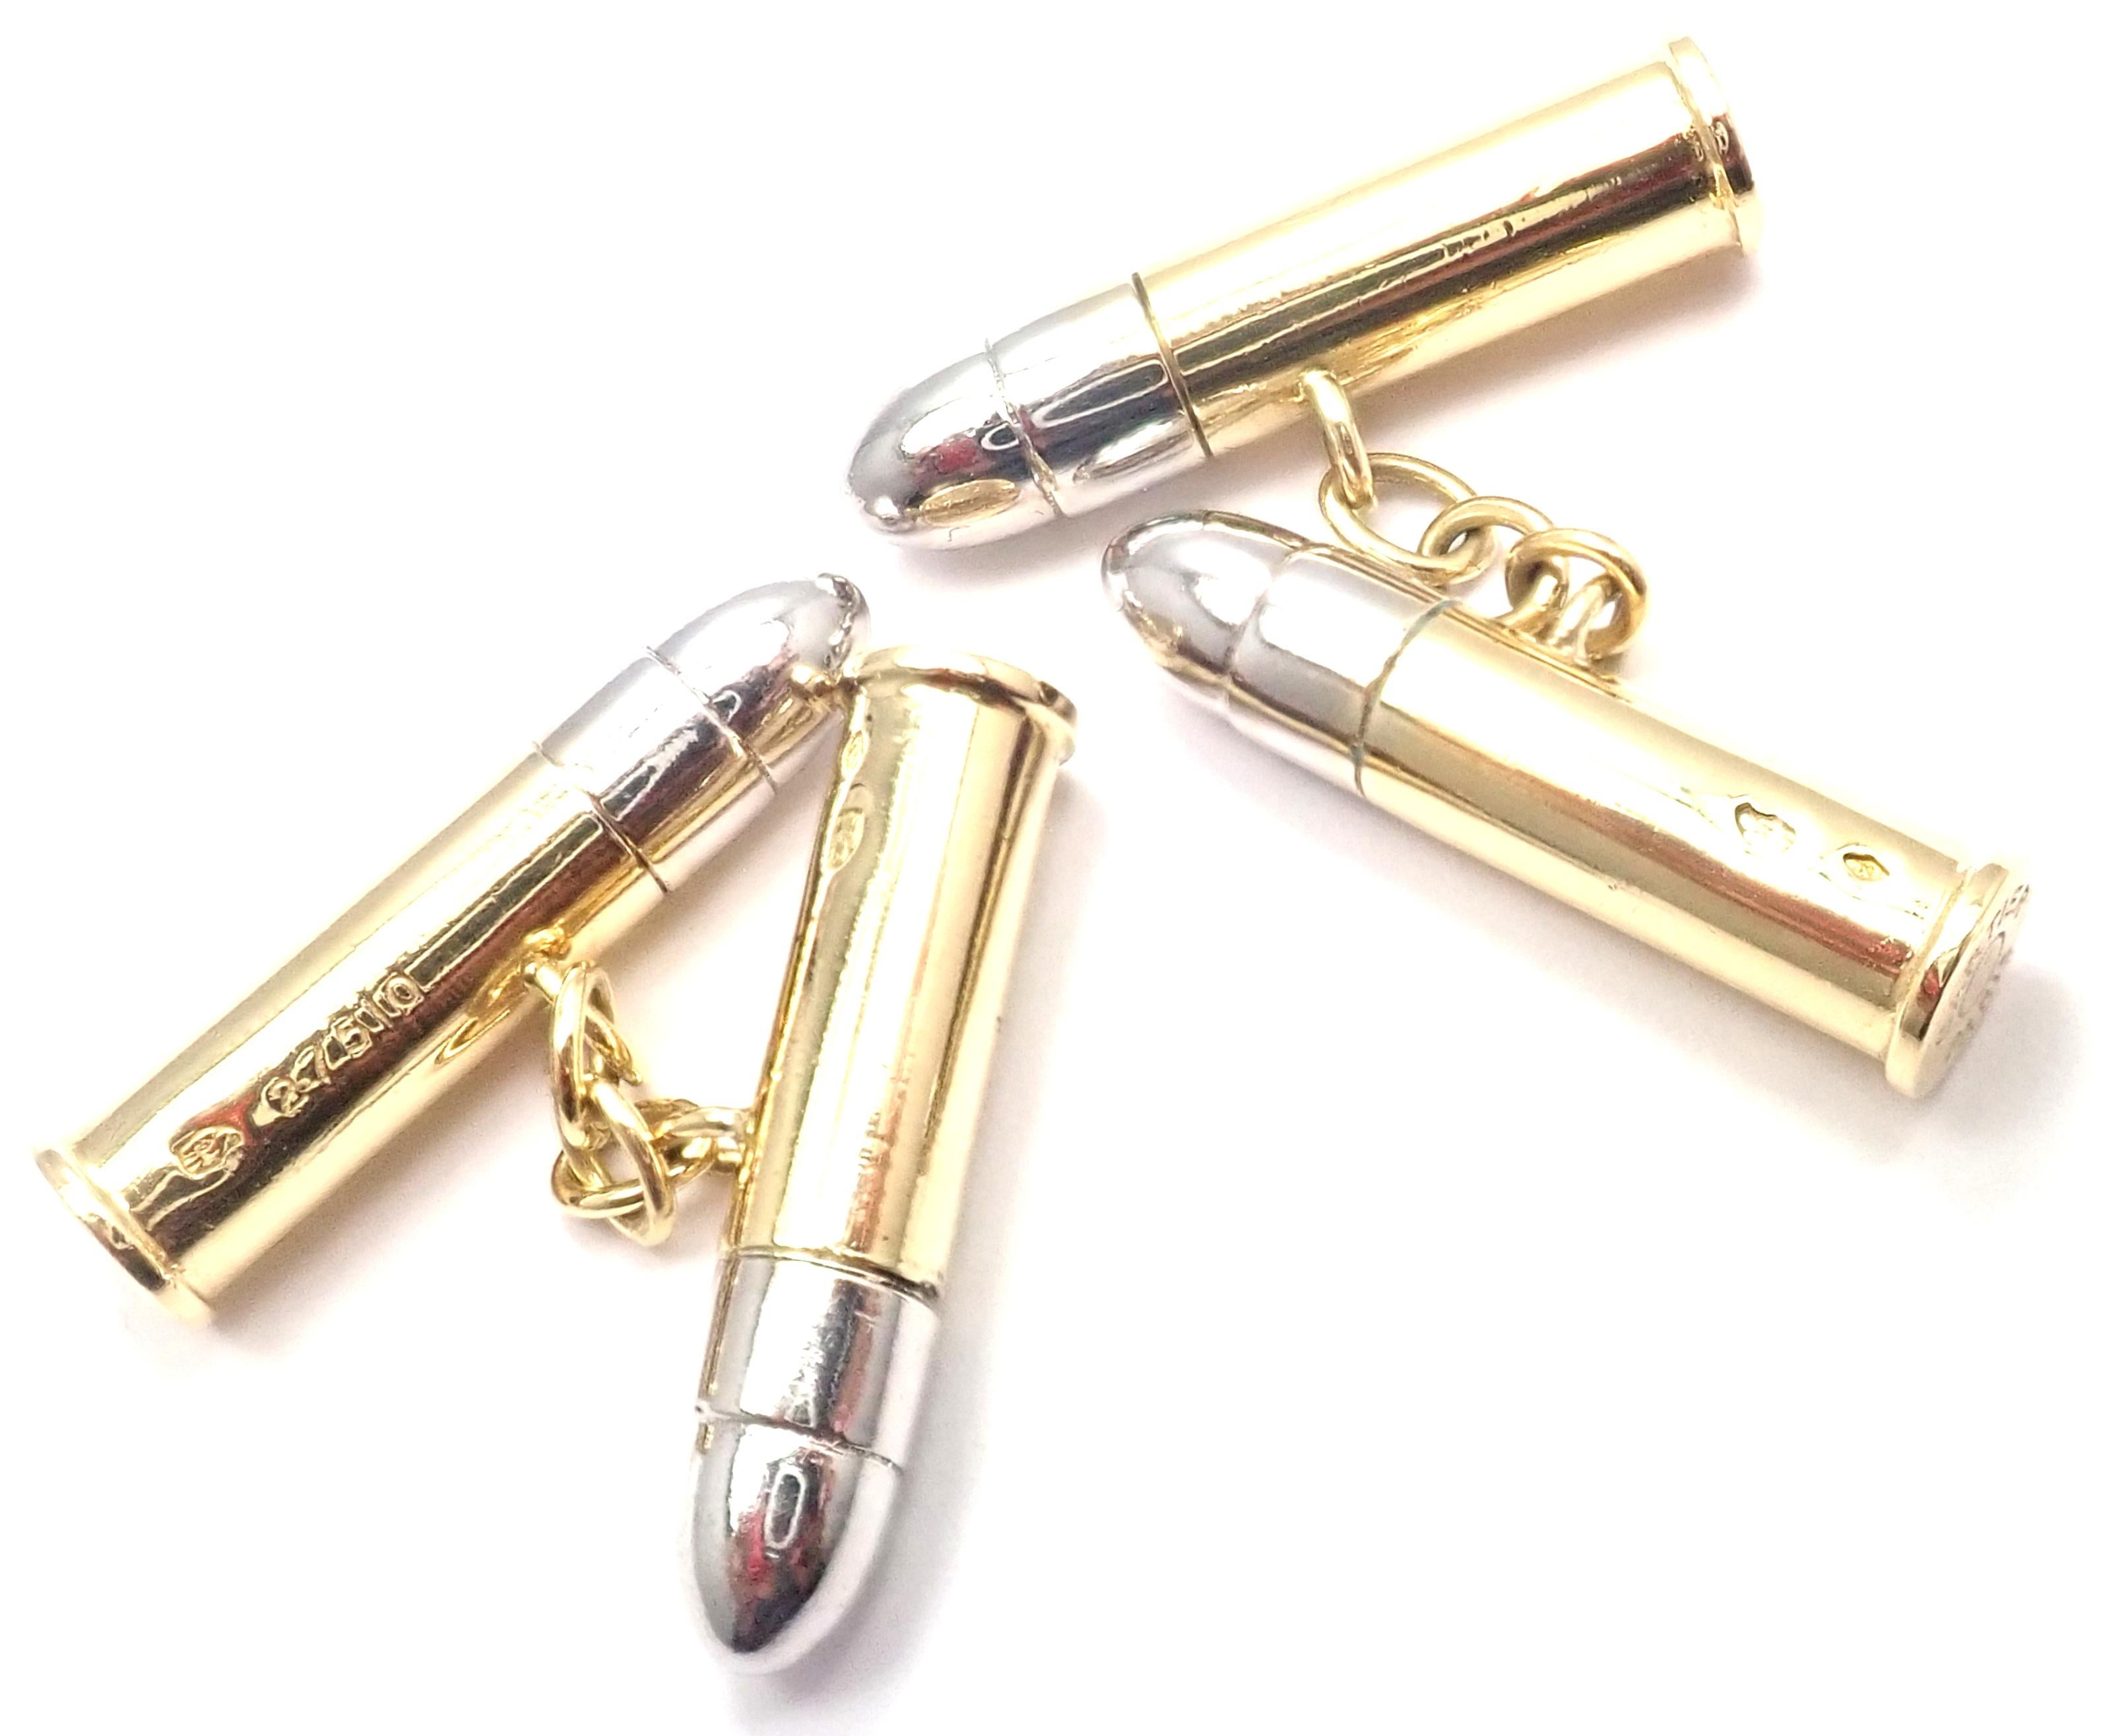 18k Yellow And White Gold Bullet Shape Cufflinks by Cartier. 
Details: 
Measurements: 25mm x 6.5mm
Weight: 27.4 grams
Stamped Hallmarks: Cartier Paris 27510 French Hallmarks
*Free Shipping within the United States*
Your Price: $6,500
T2561tndd